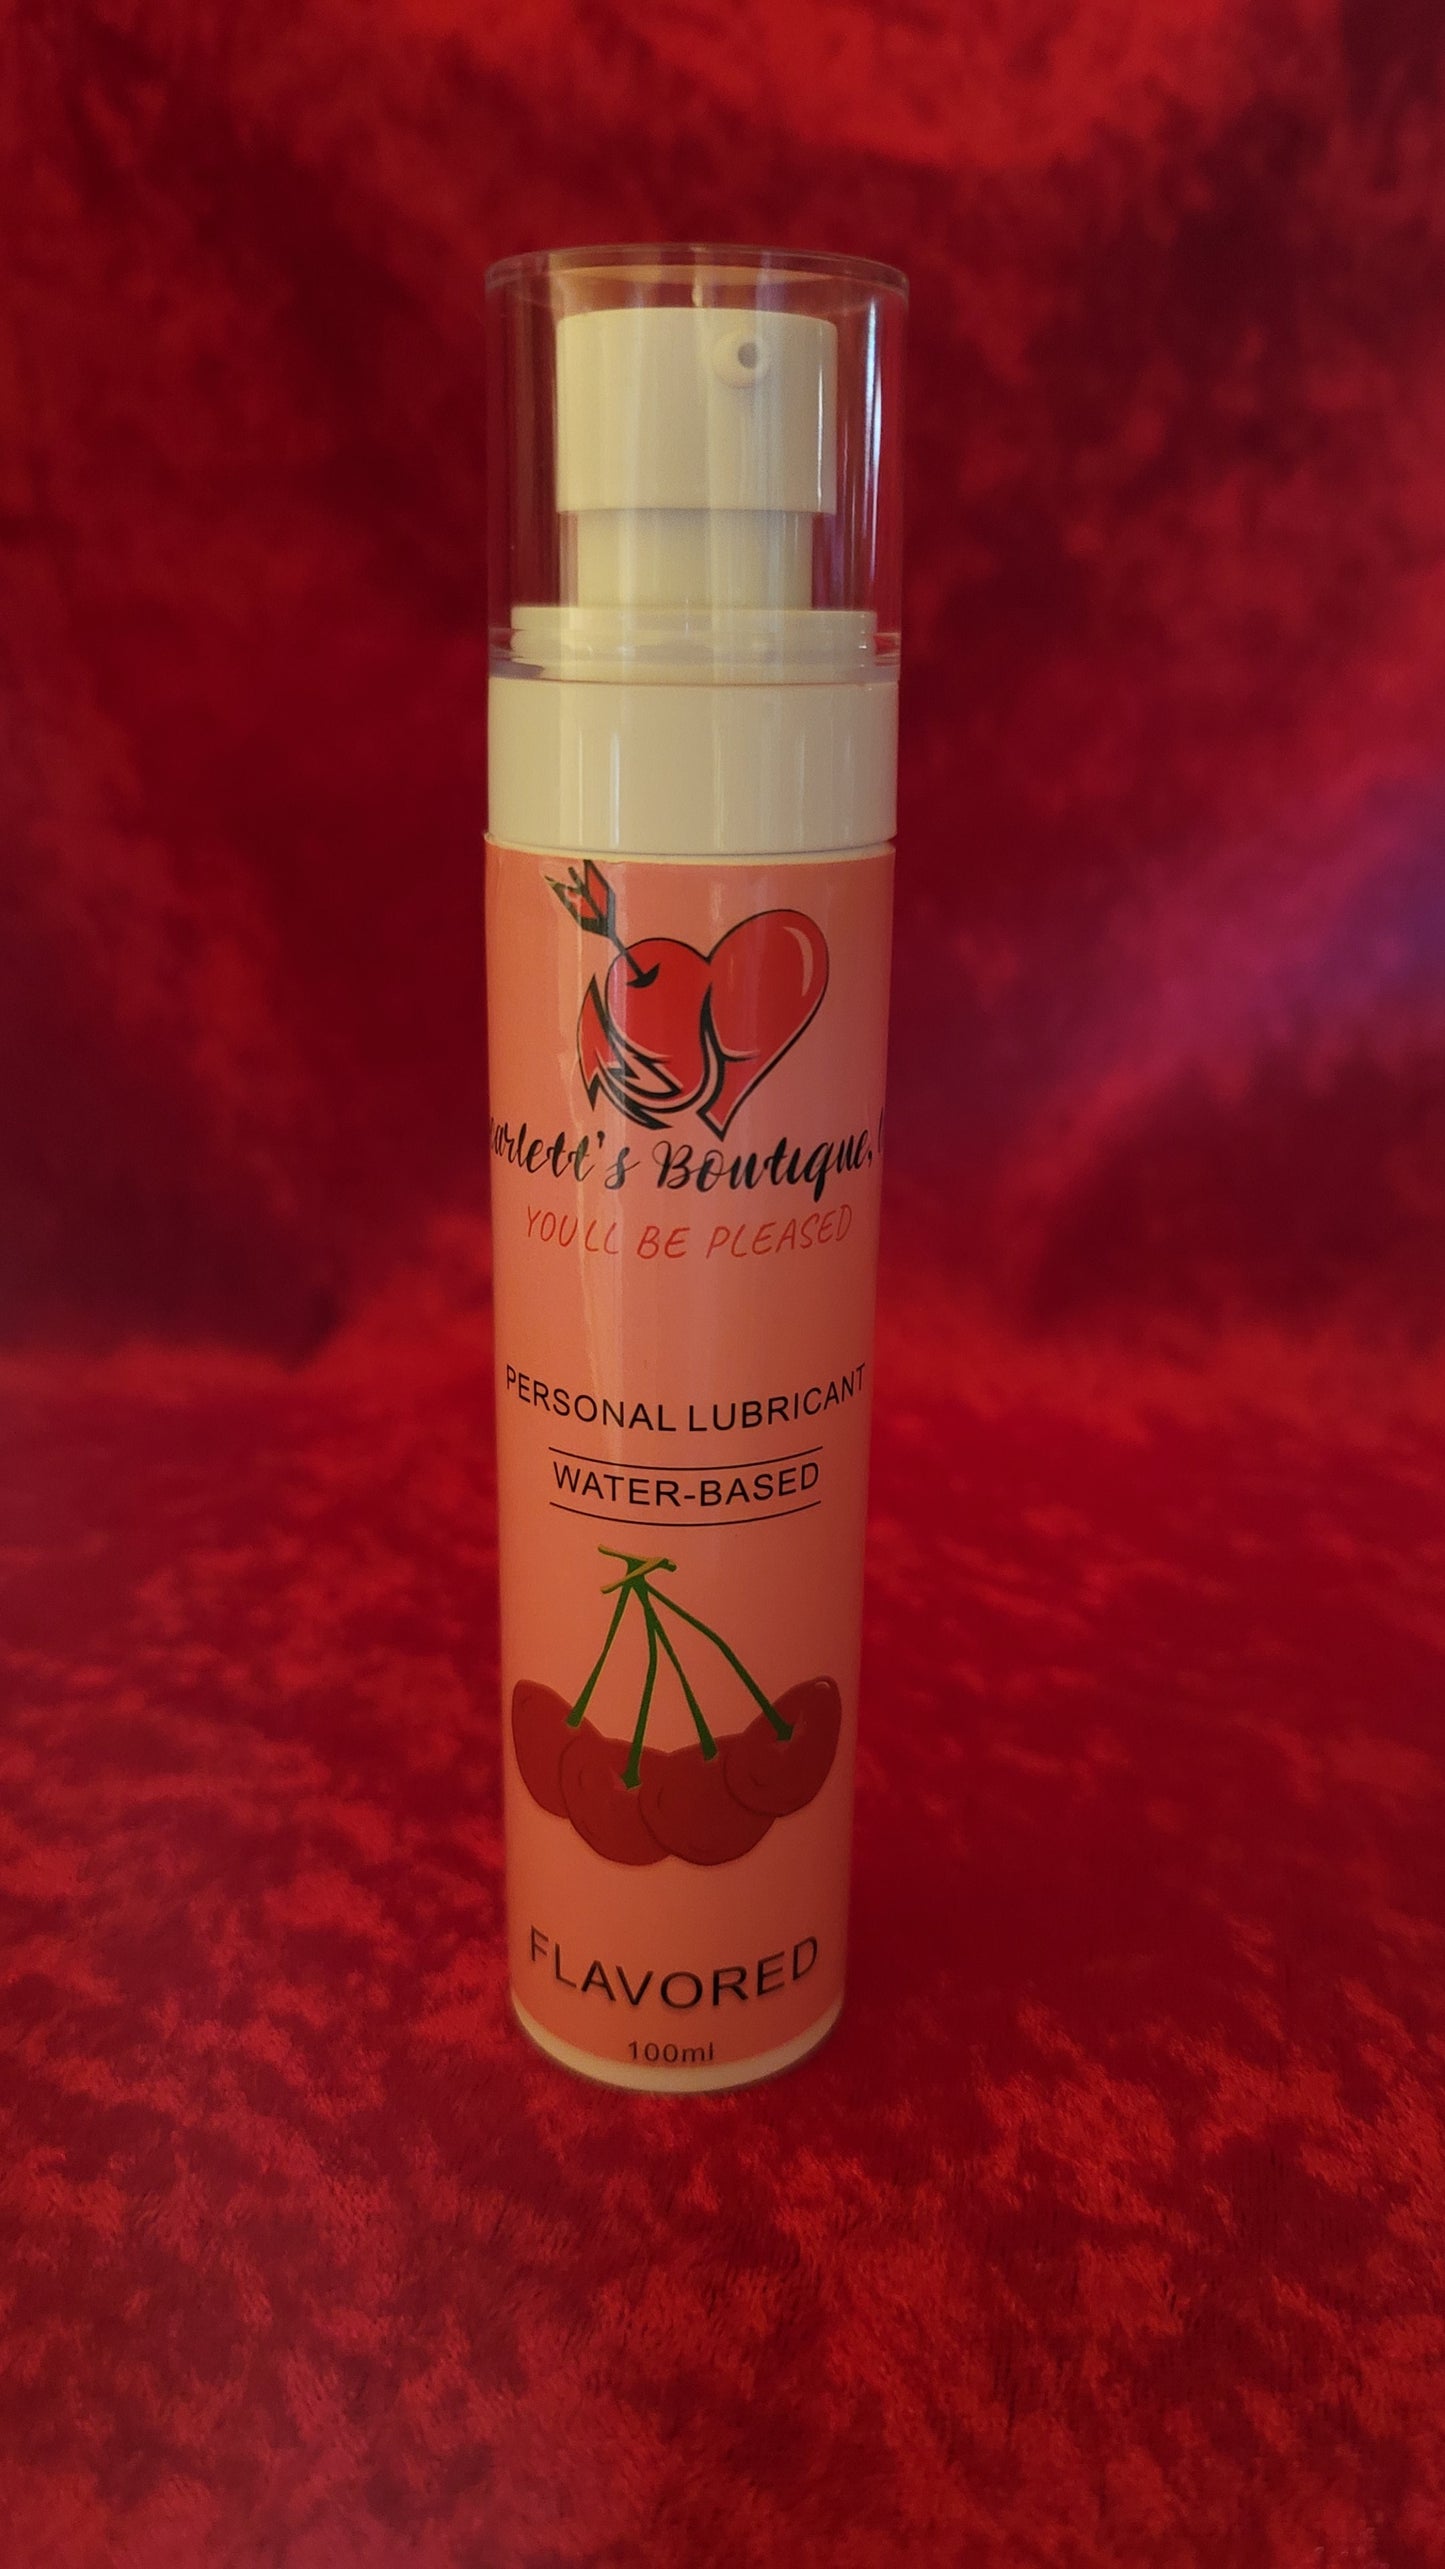 Scarlett's Boutique Cherry Flavored Lubricant